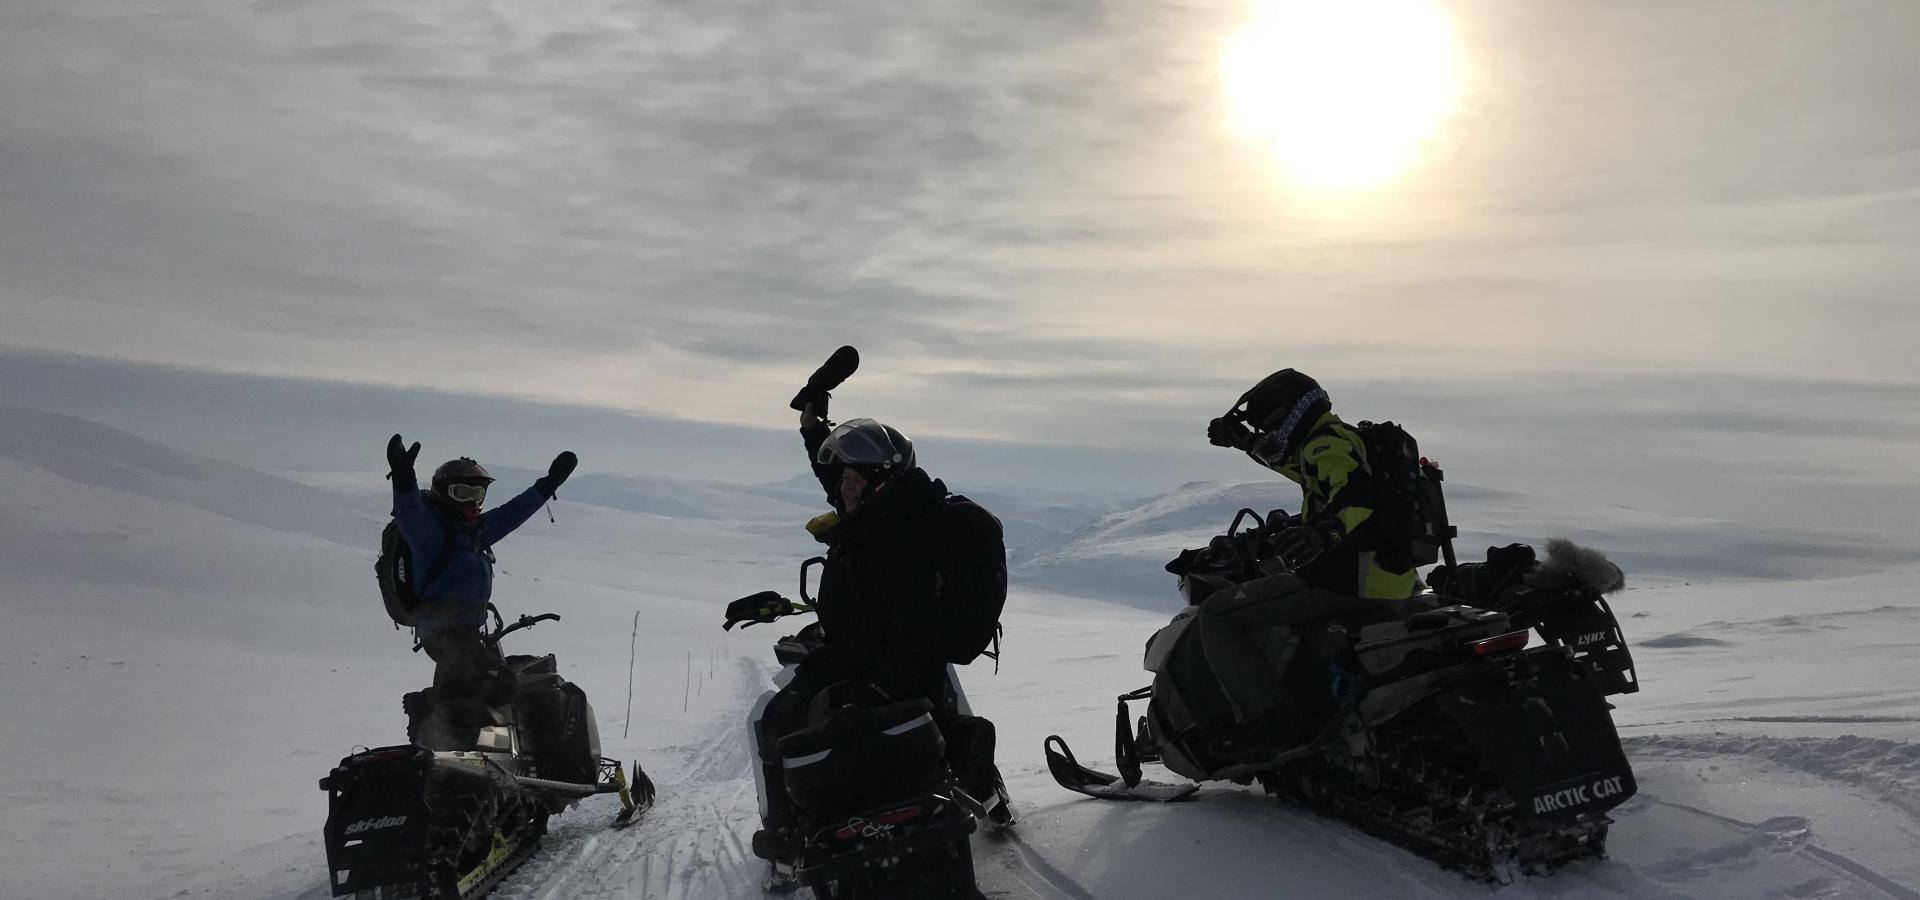 Mid day snowmobile excursion with North Experience - no transfer 